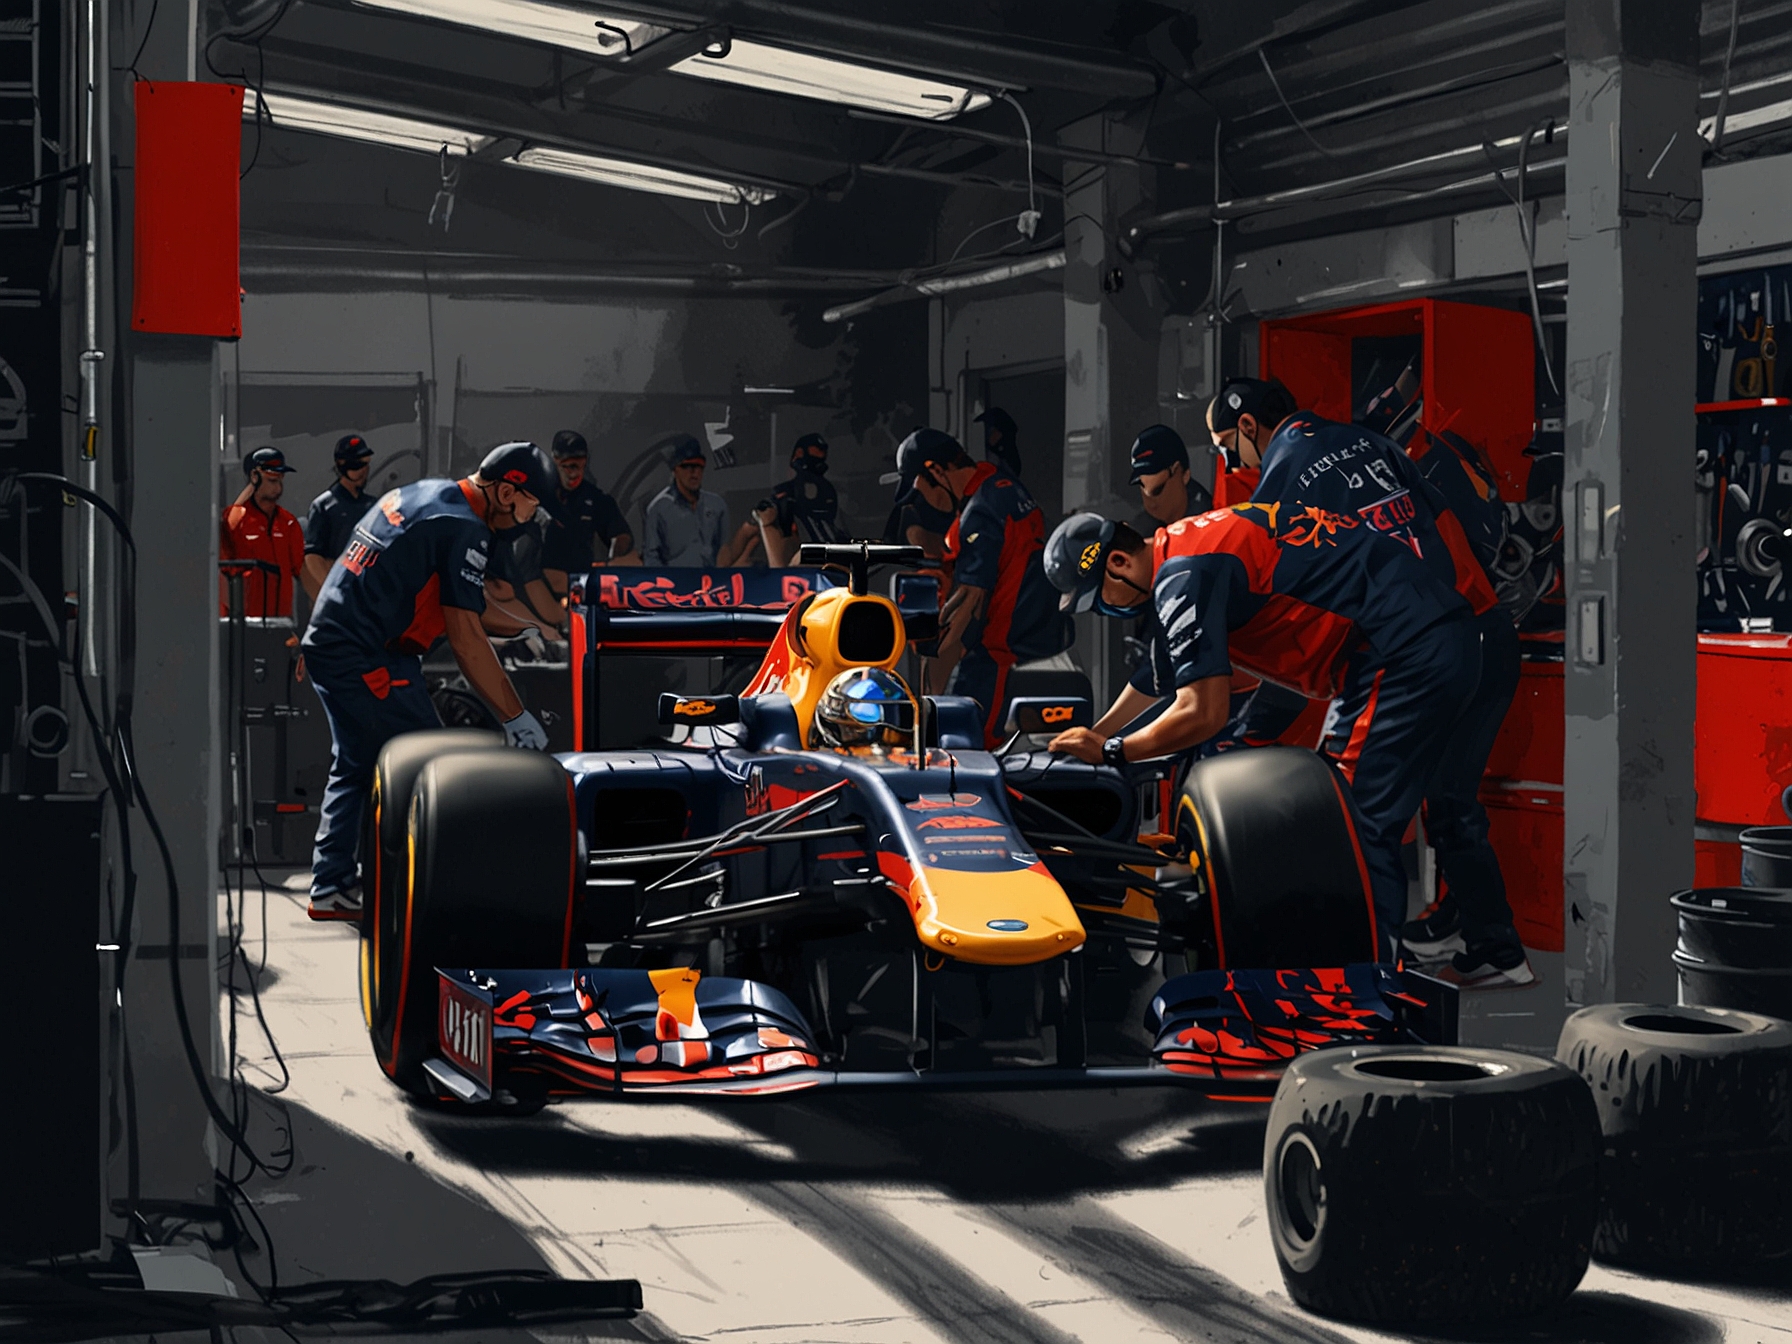 Red Bull team members working on the car upgrades in the pits during the Spanish GP weekend, showcasing their determined efforts to improve performance amid intense competition.